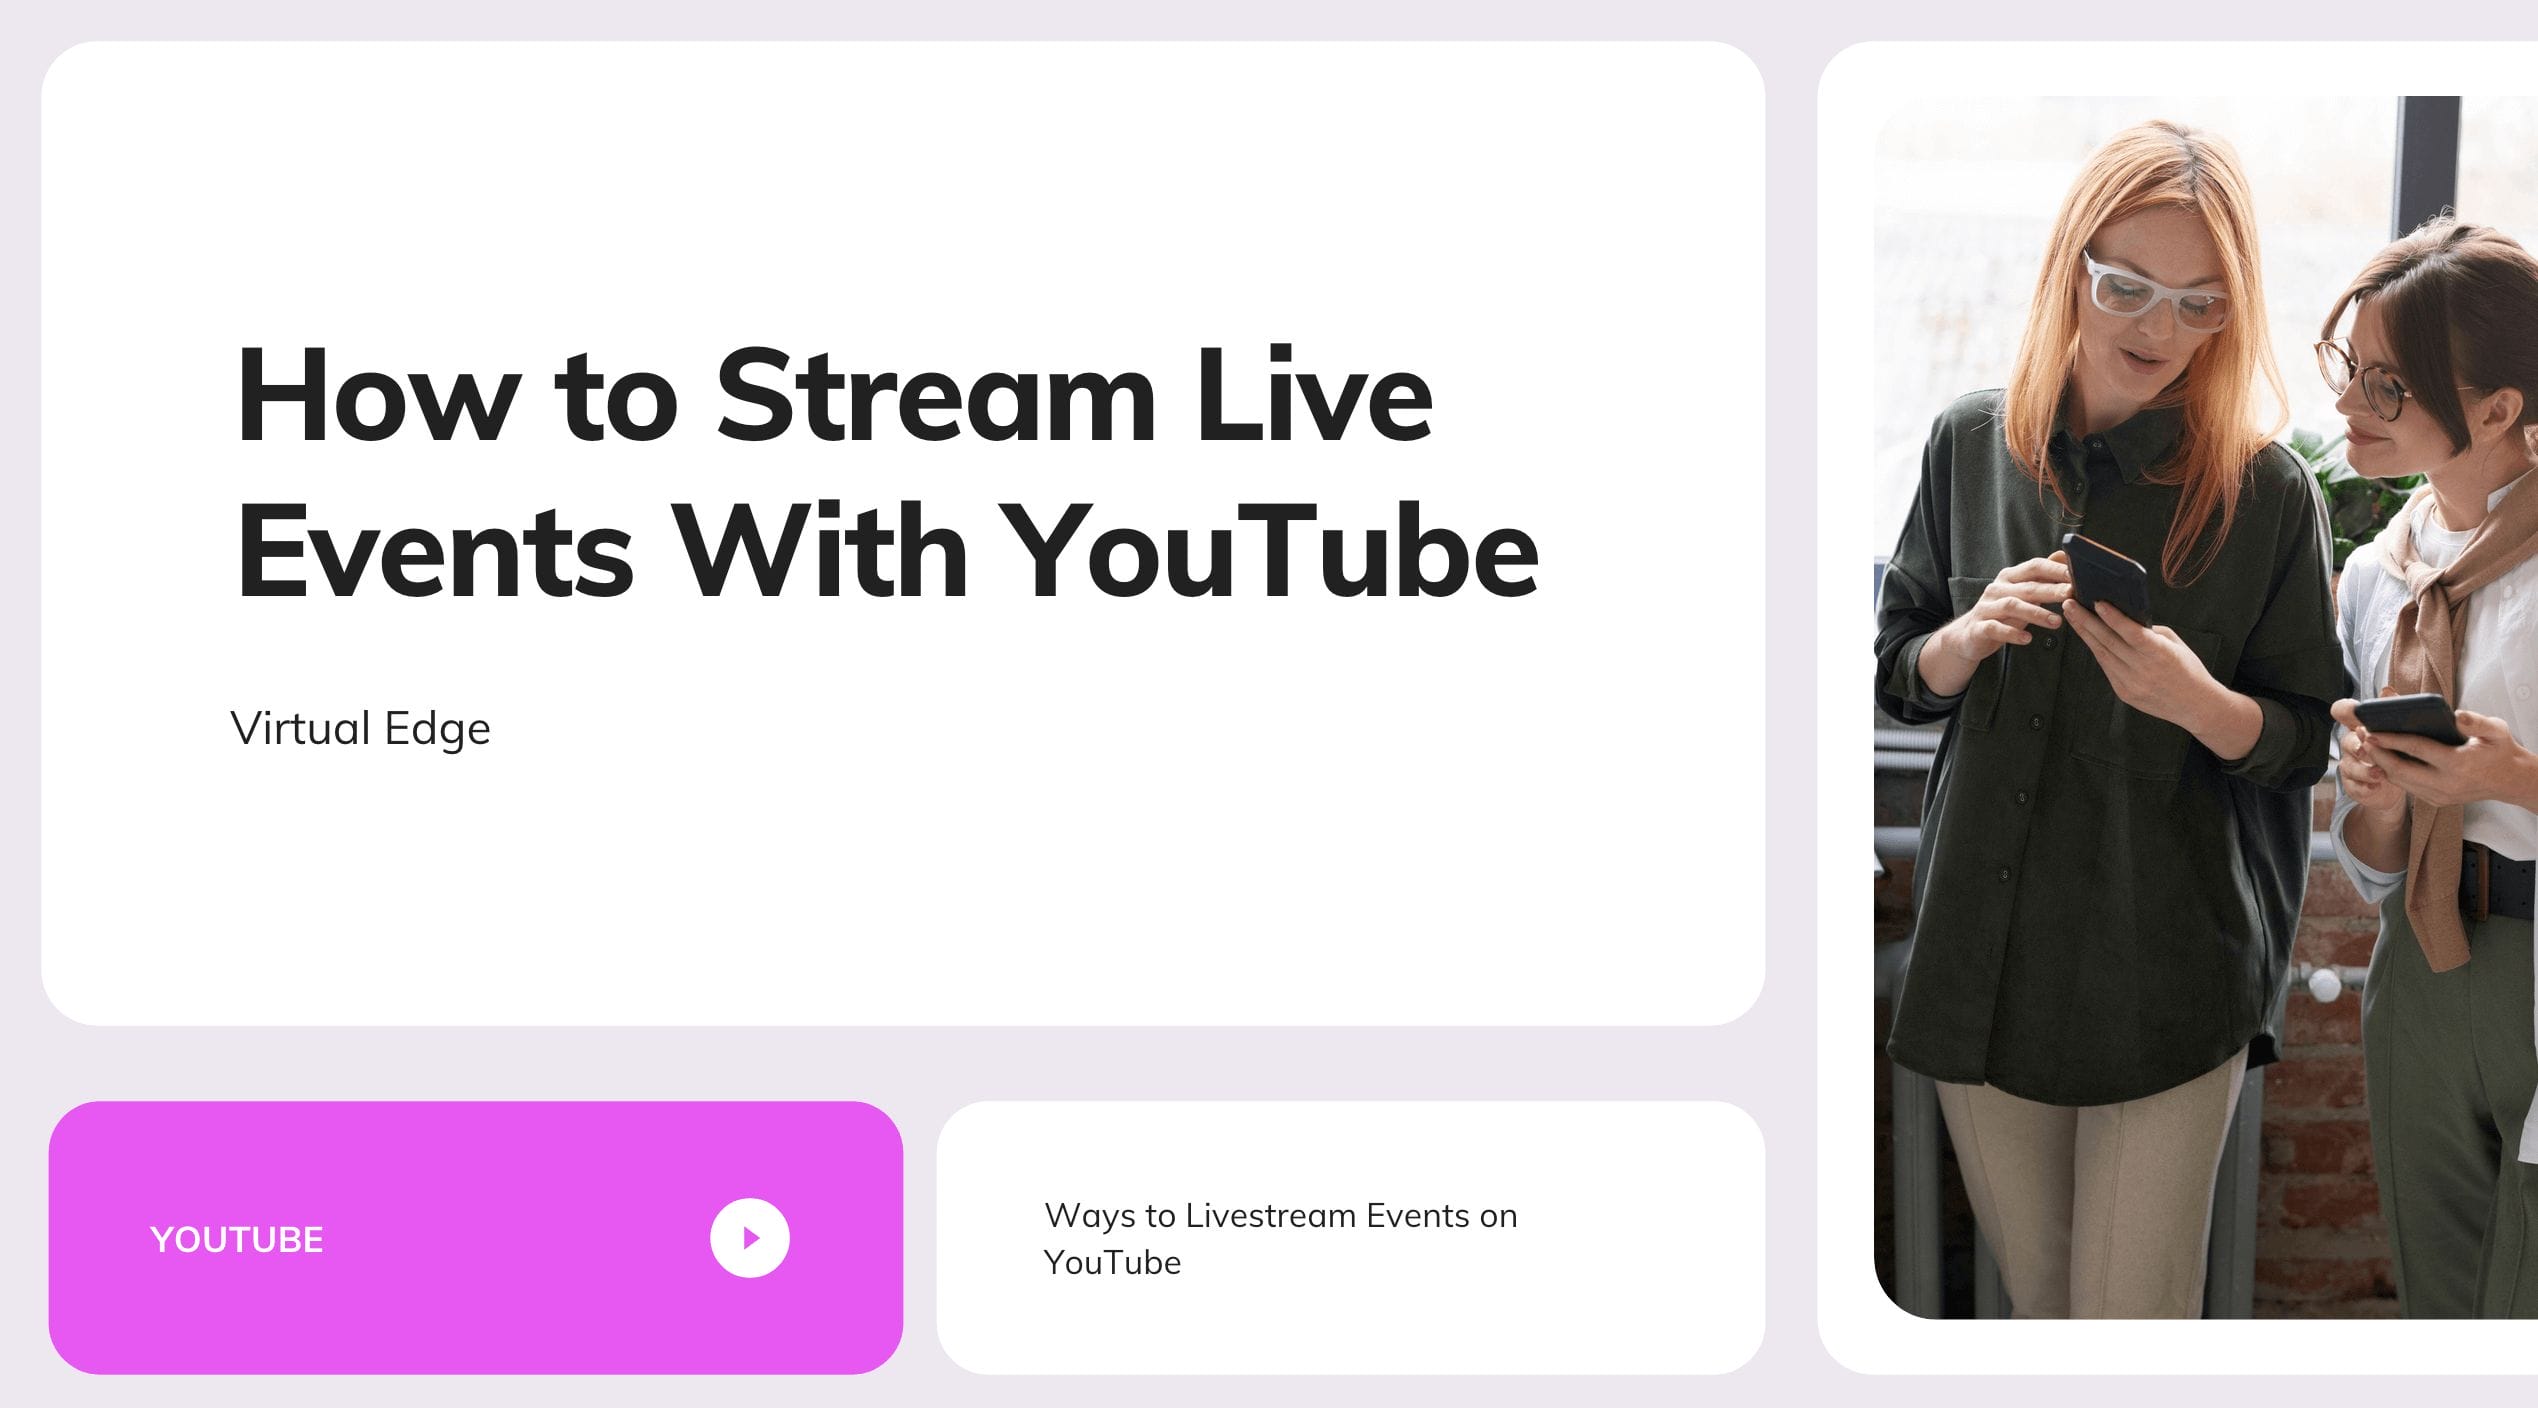 How to Stream Live Events With YouTube